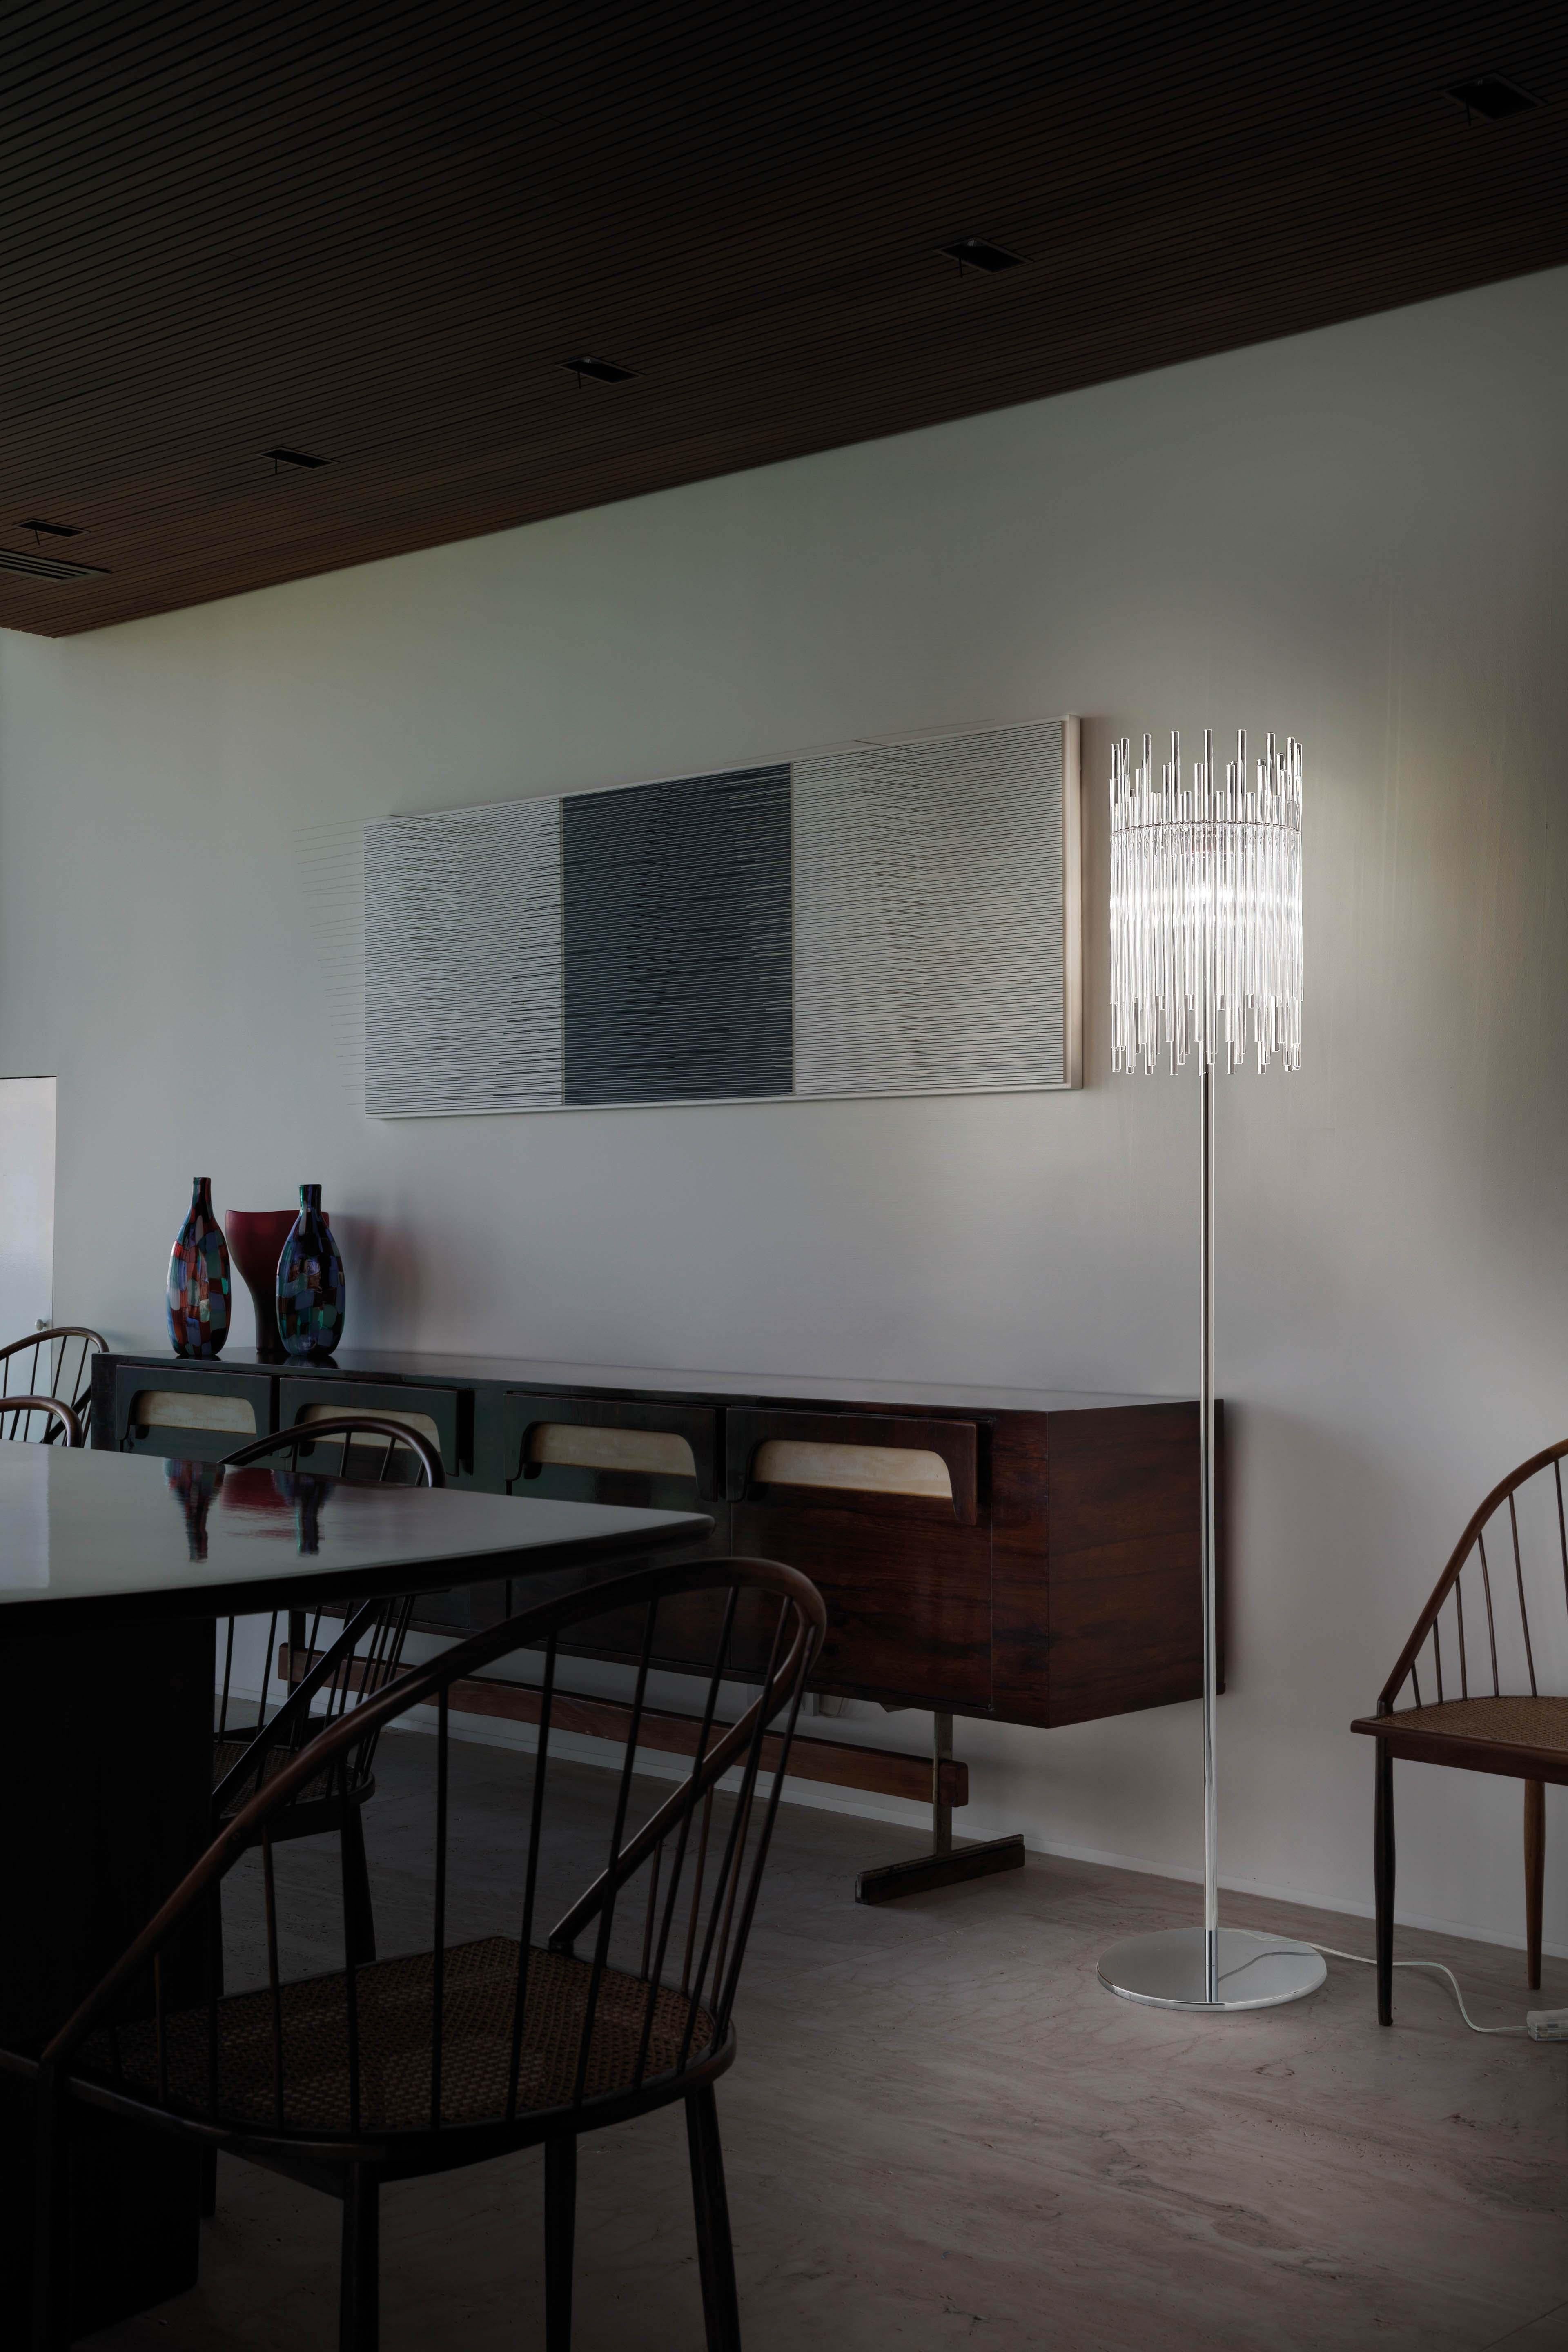 Diadema is a lighting system based on a single element, the rod of pure glass. It takes advantage of the way it reflects and transmits the light, while offering a sense of movement by using rods of different sizes. The metal body allows to offer